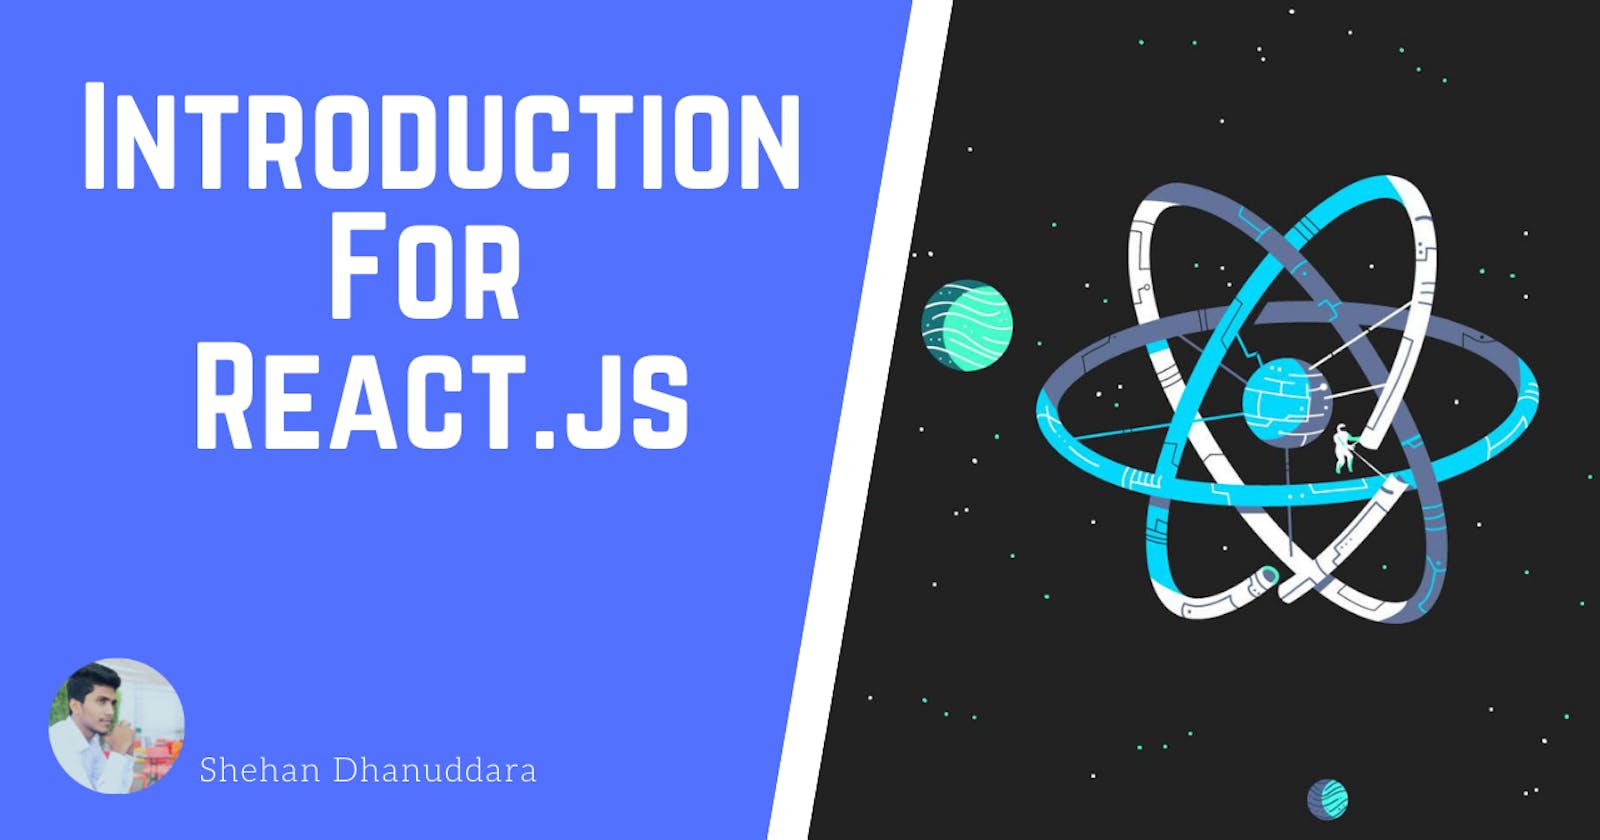 Introduction For REACT.JS